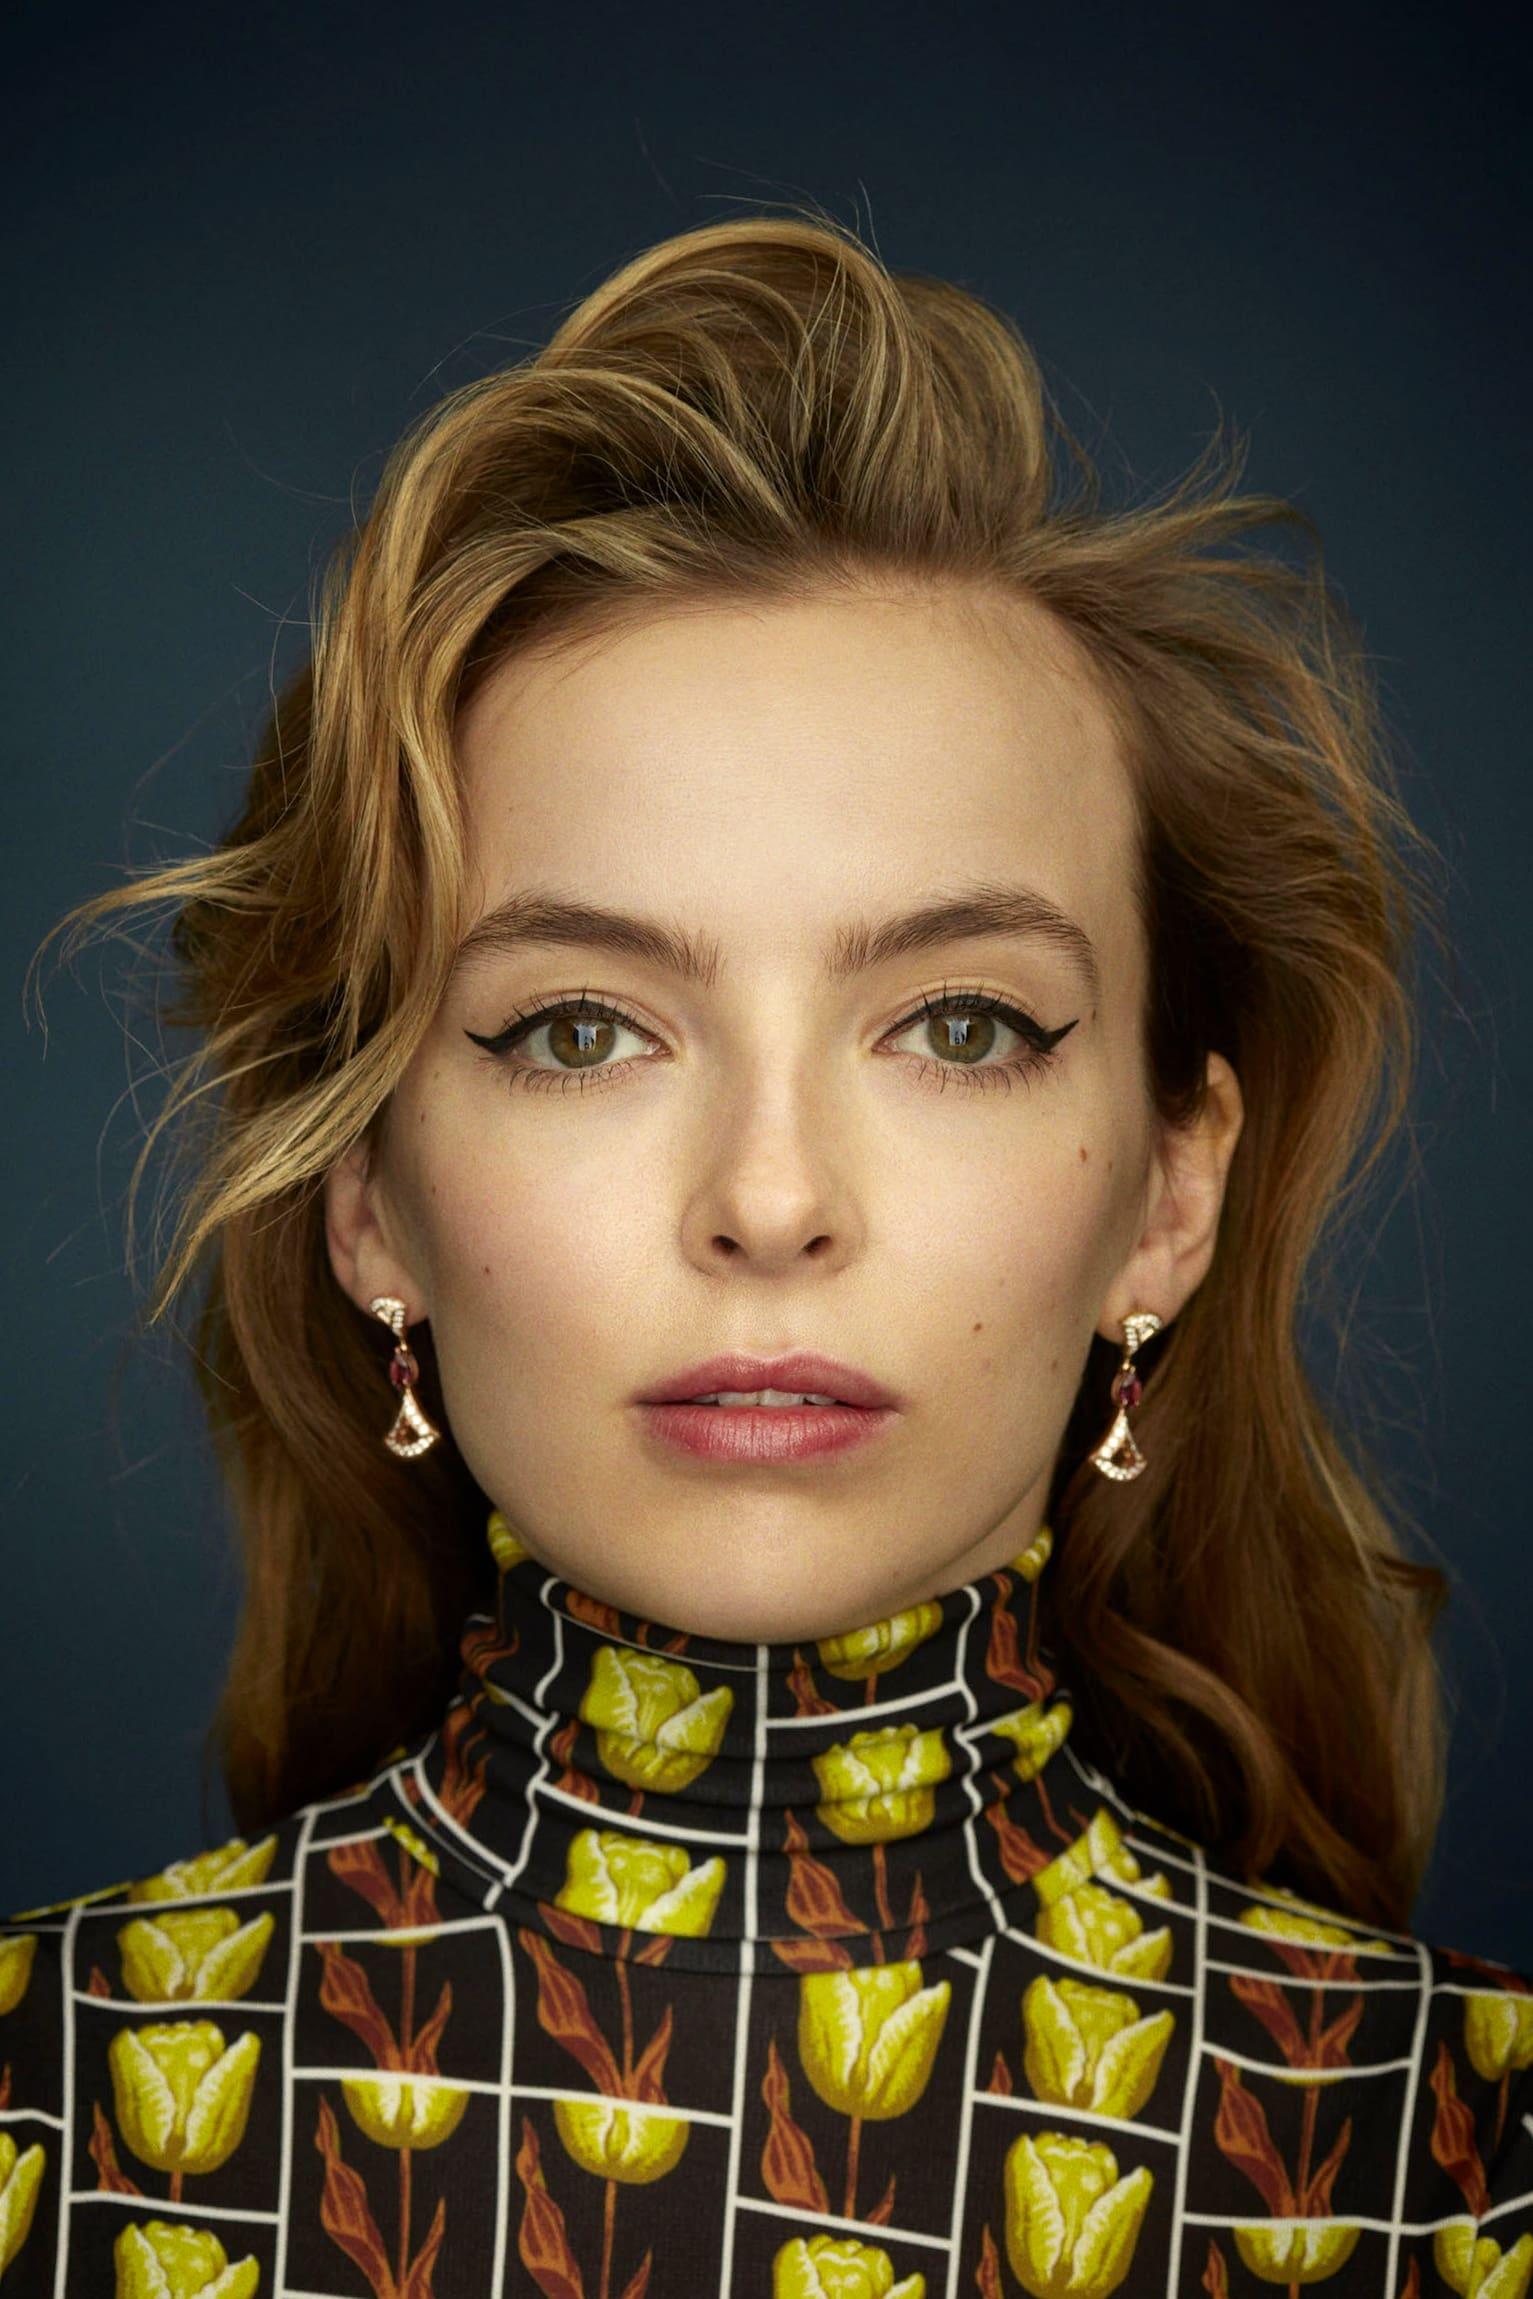 Jodie Comer poster